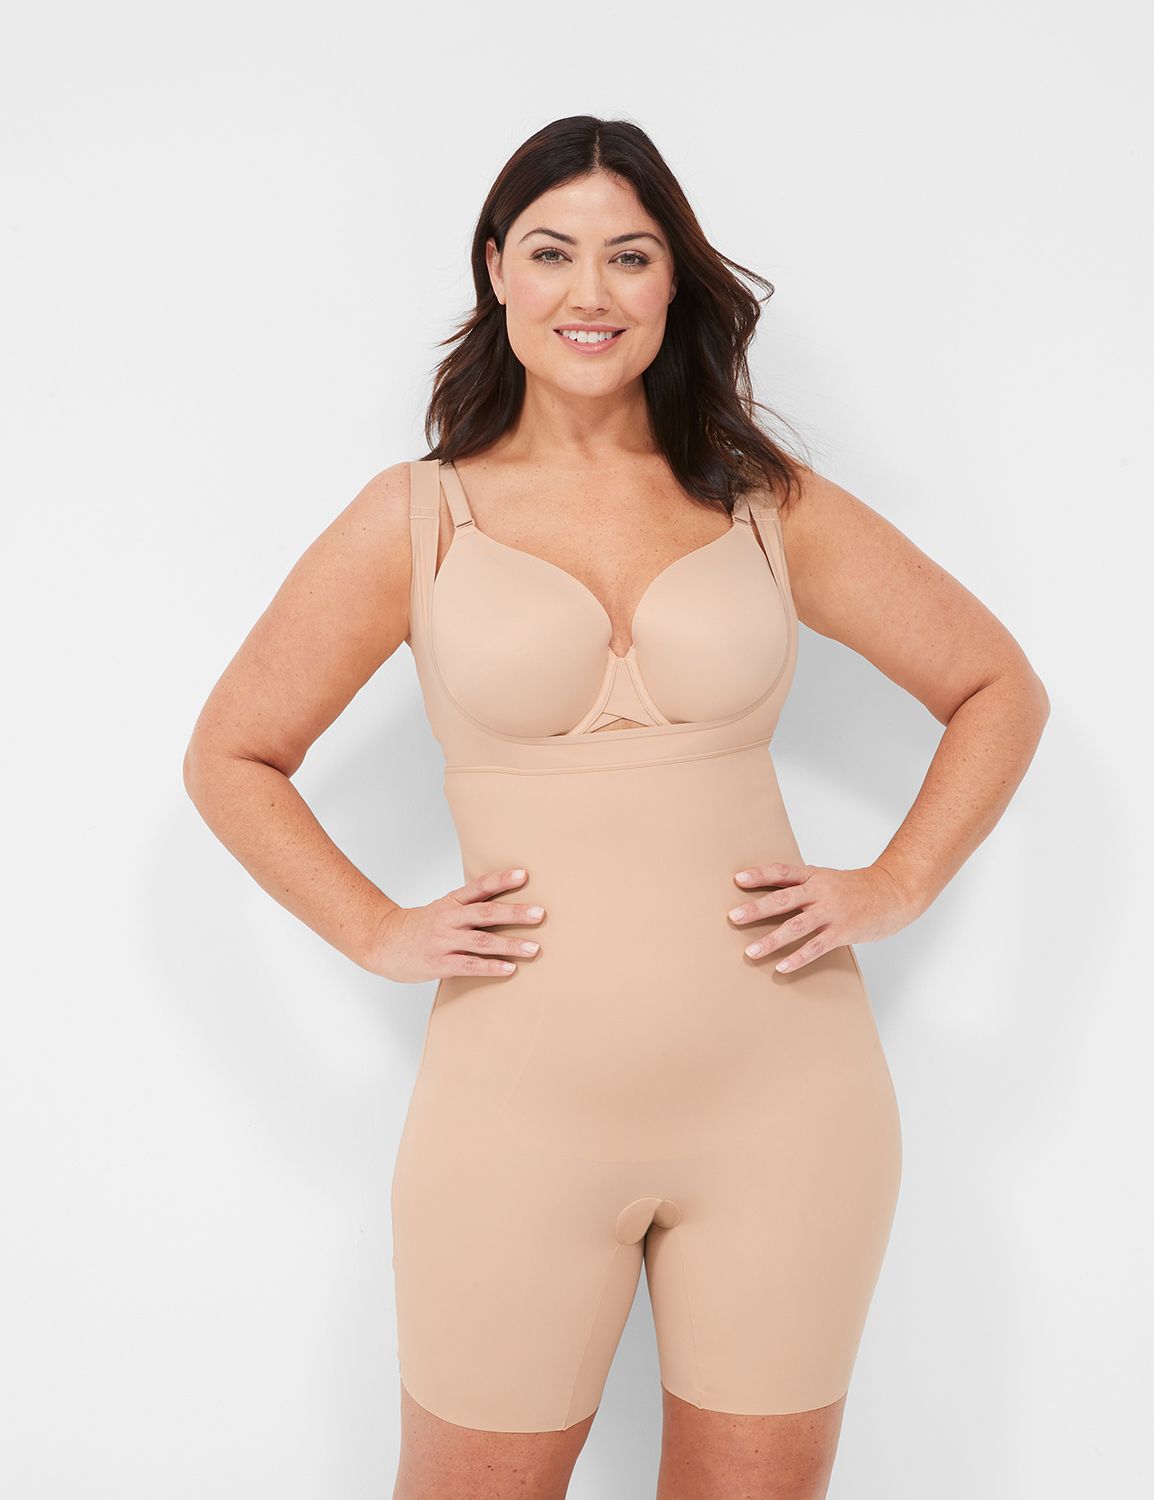 Shannon Spake Bra Size, Body shape: Hourglass: Dress size (US): 10:  Breasts-Waist-Hips: 37-29-38 inches (94-74-97 cm) Shoe size (US): 8: Bra  size: 36C: Cup size (US): C: Height: 5' 8” (173 cm) Weight: 152 pounds (69  kg).